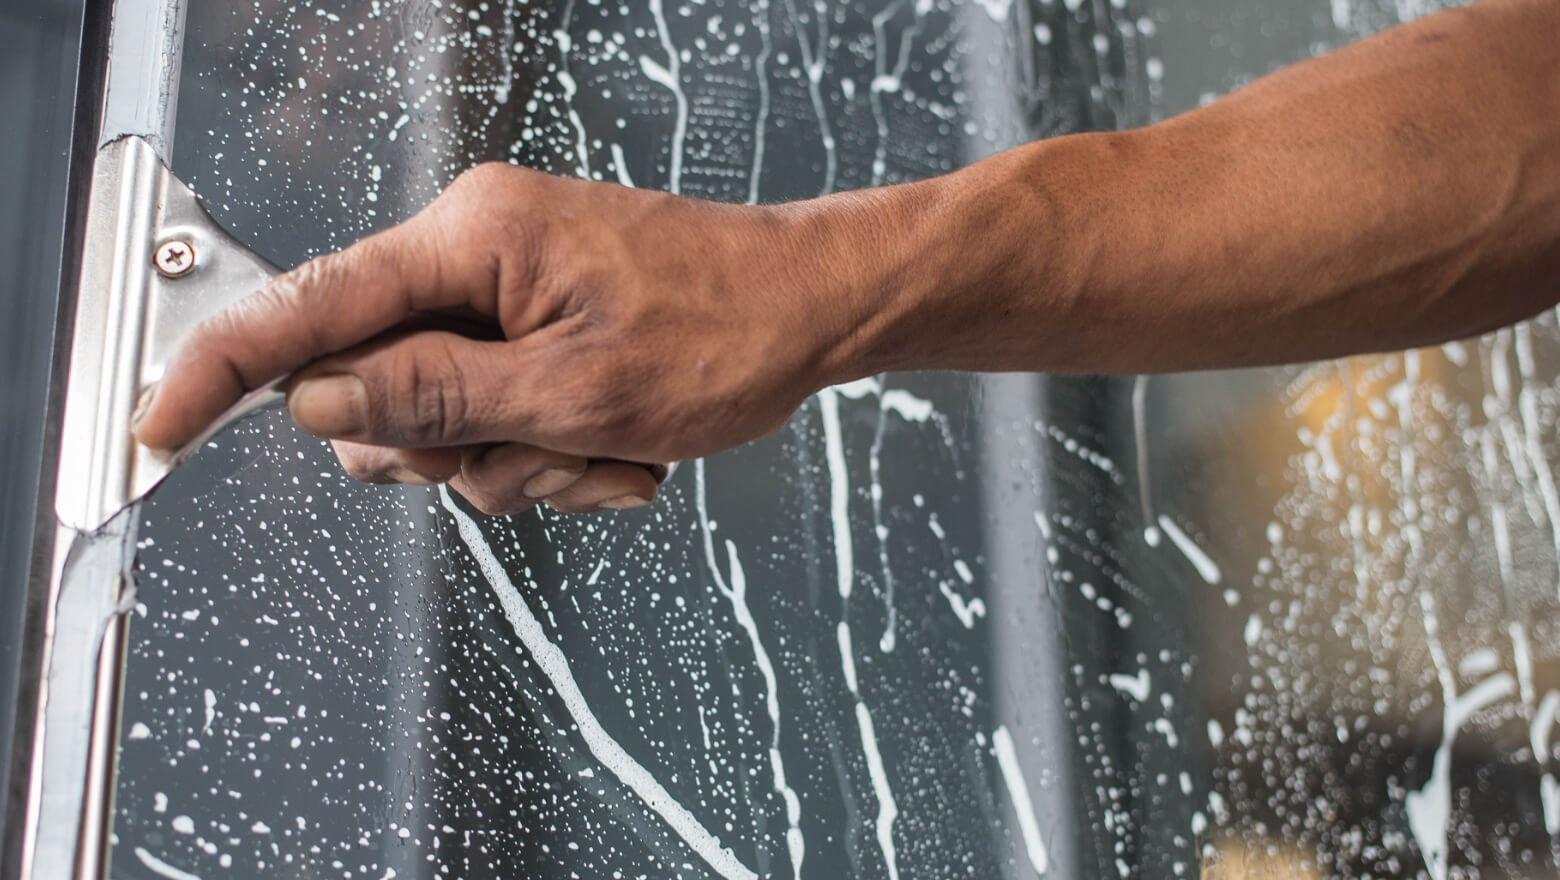 Cleaning glass surfaces